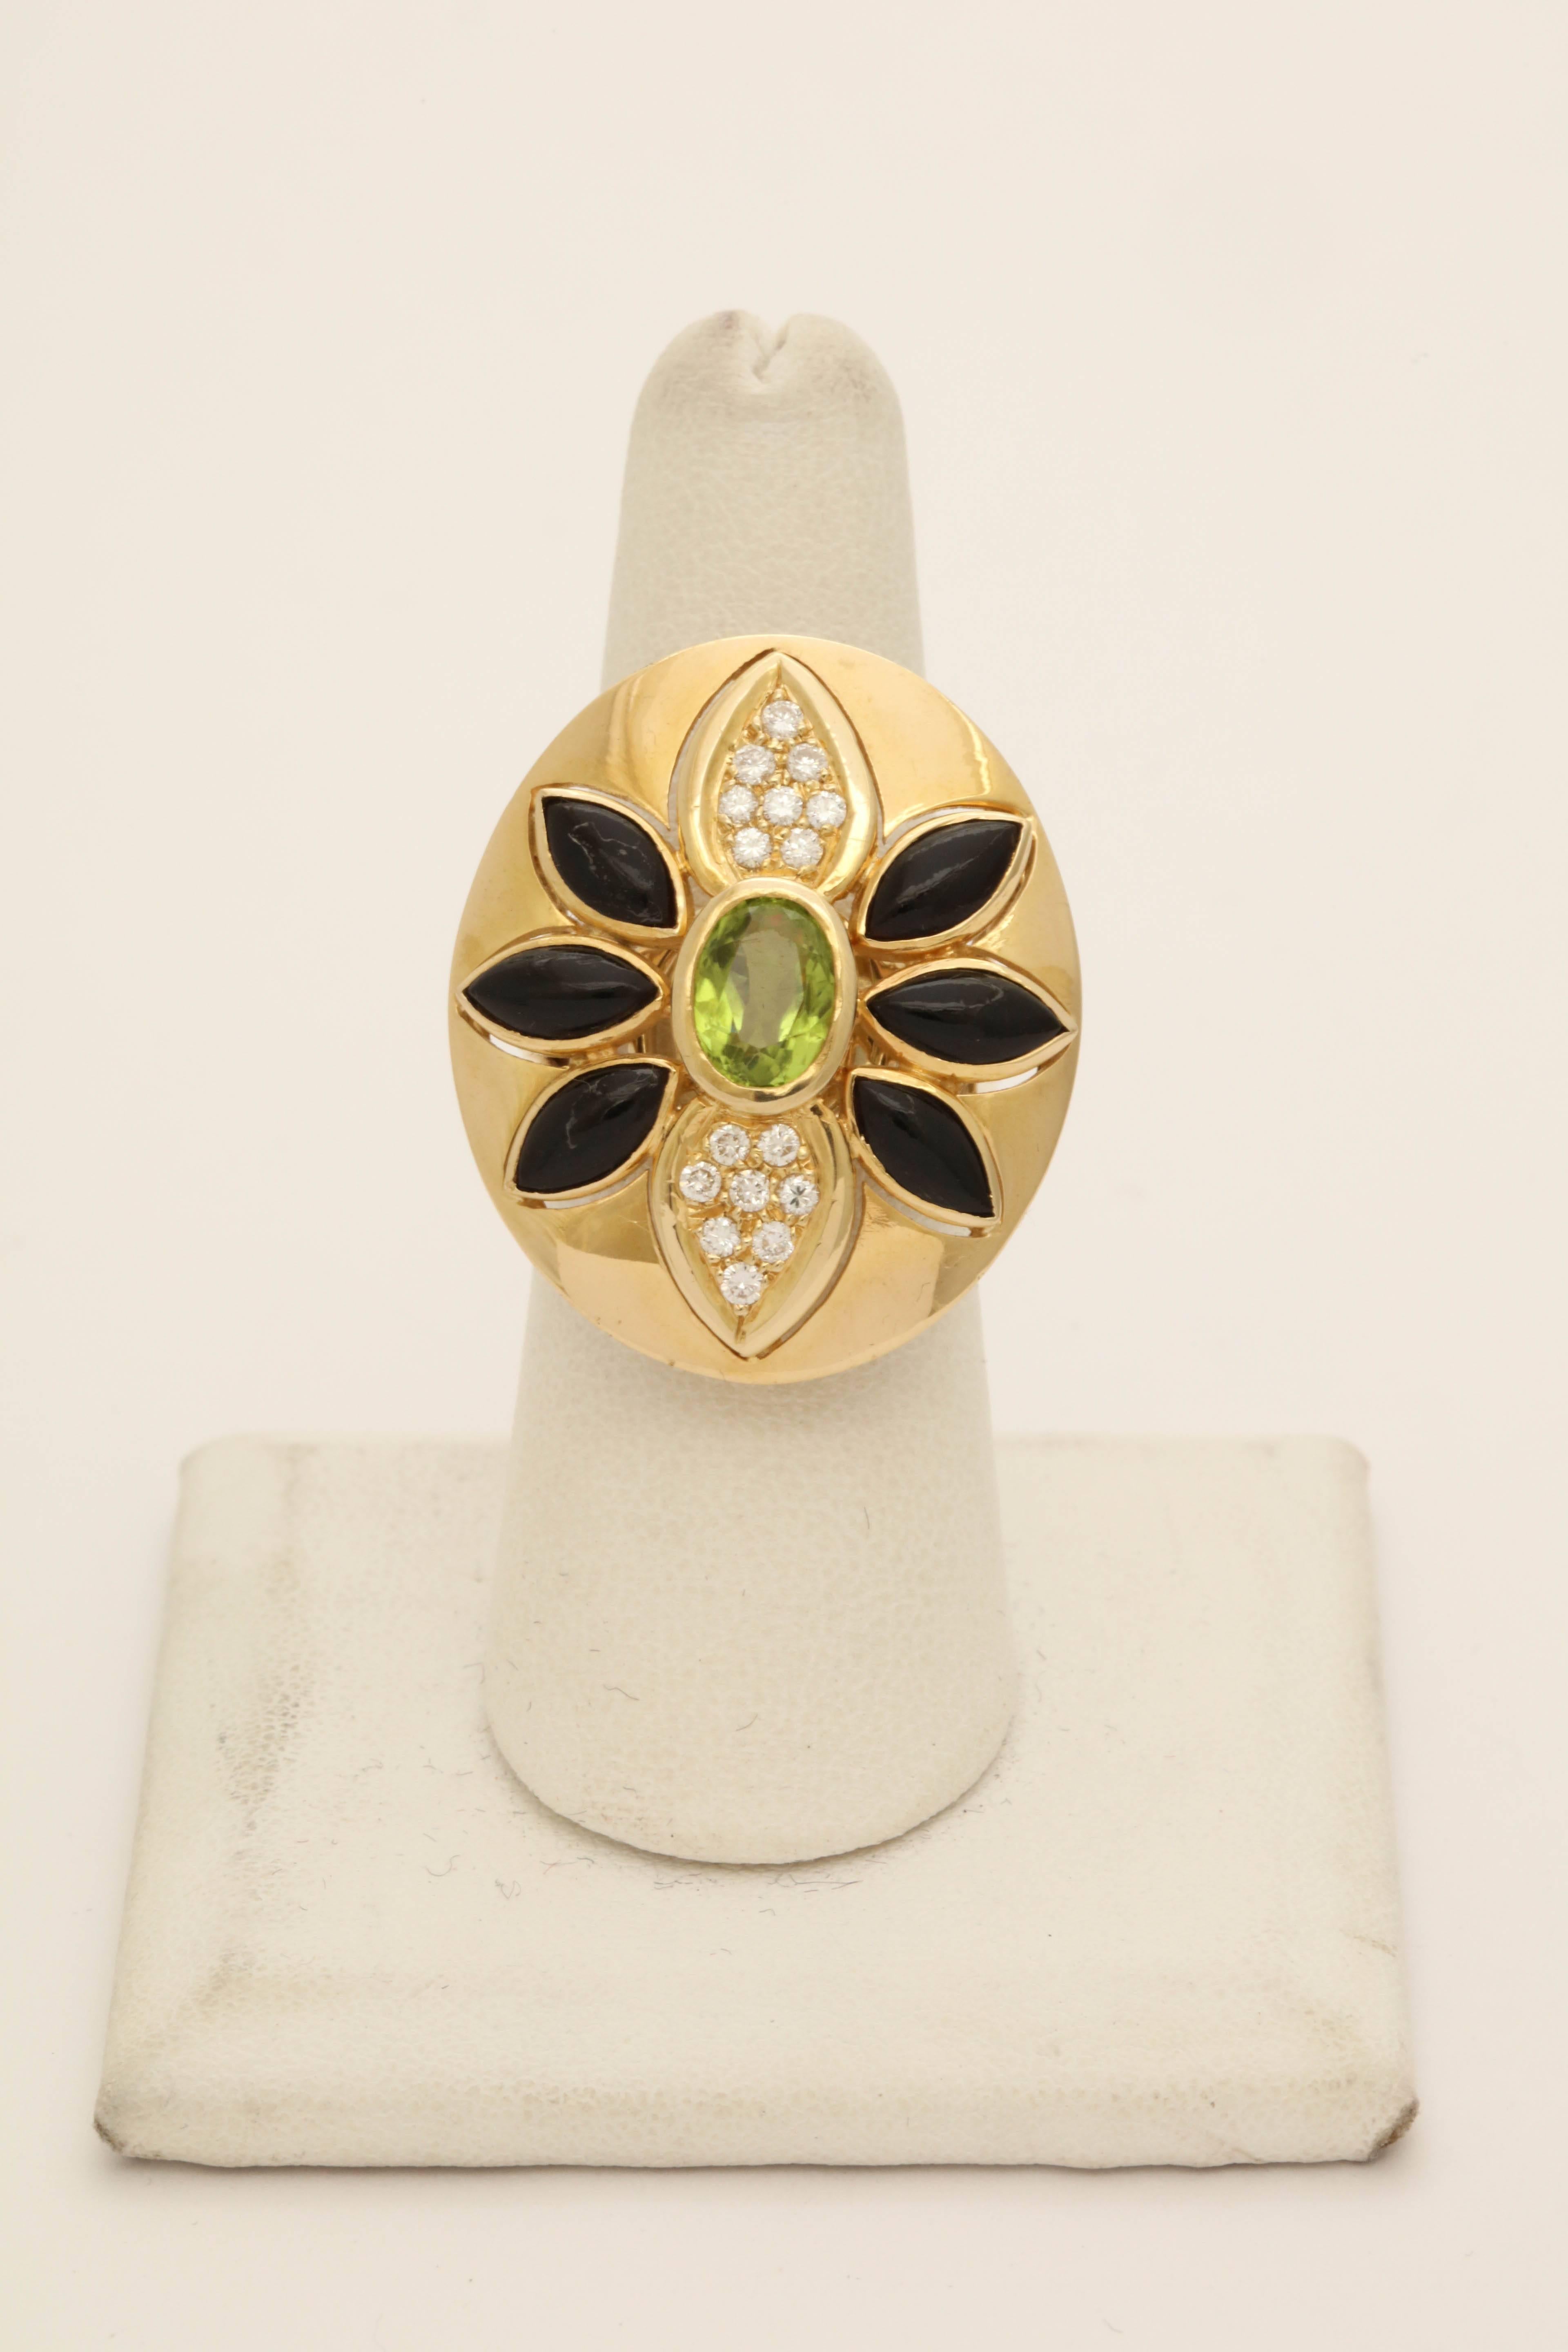 One Ladies Large Cocktail Ring Embellished With A 1.50 Ct Bezel set Faceted Peridot Stone.Further Decorated With Six Bezel Set Marquis Cut Onyxes With 16 Full Cut Diamonds Weighing Approximately .50 cts total Weight.The Design Resembles A Floral